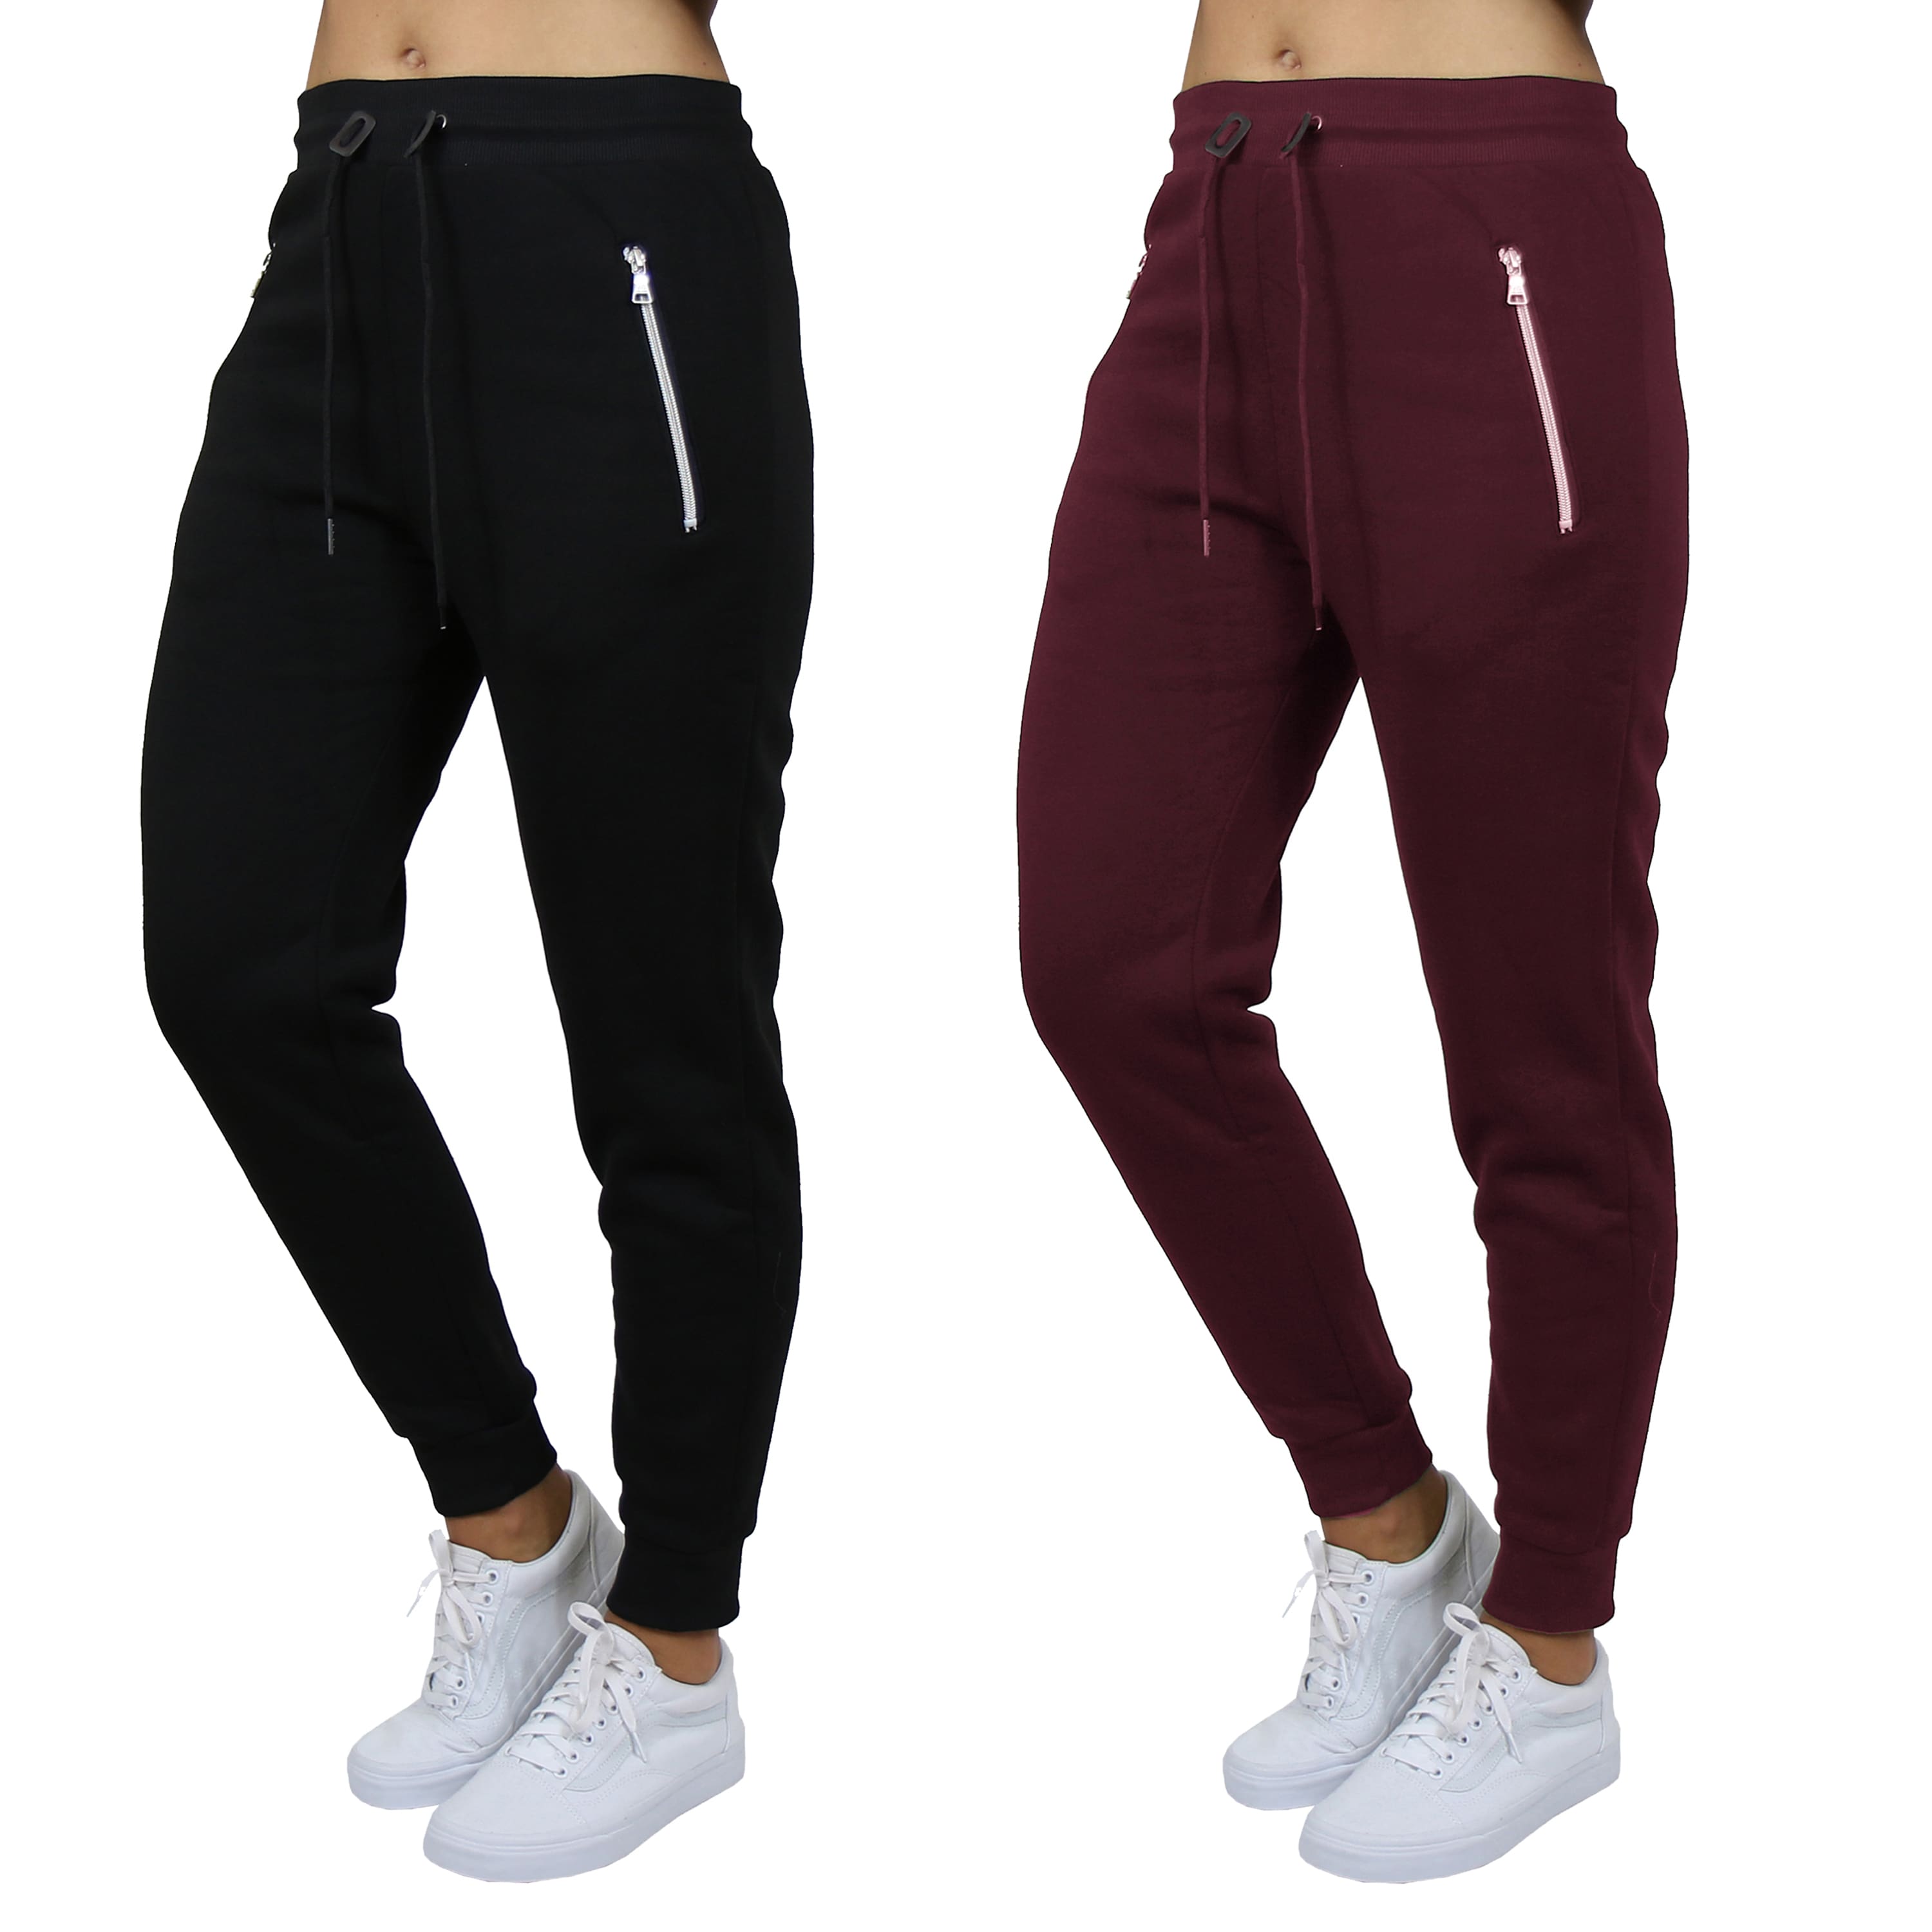 Galaxy by Harvic Women's Relaxed-Fit Fleece-Lined Zipper Pockets Jogger  Sweatpants, 2 Pack